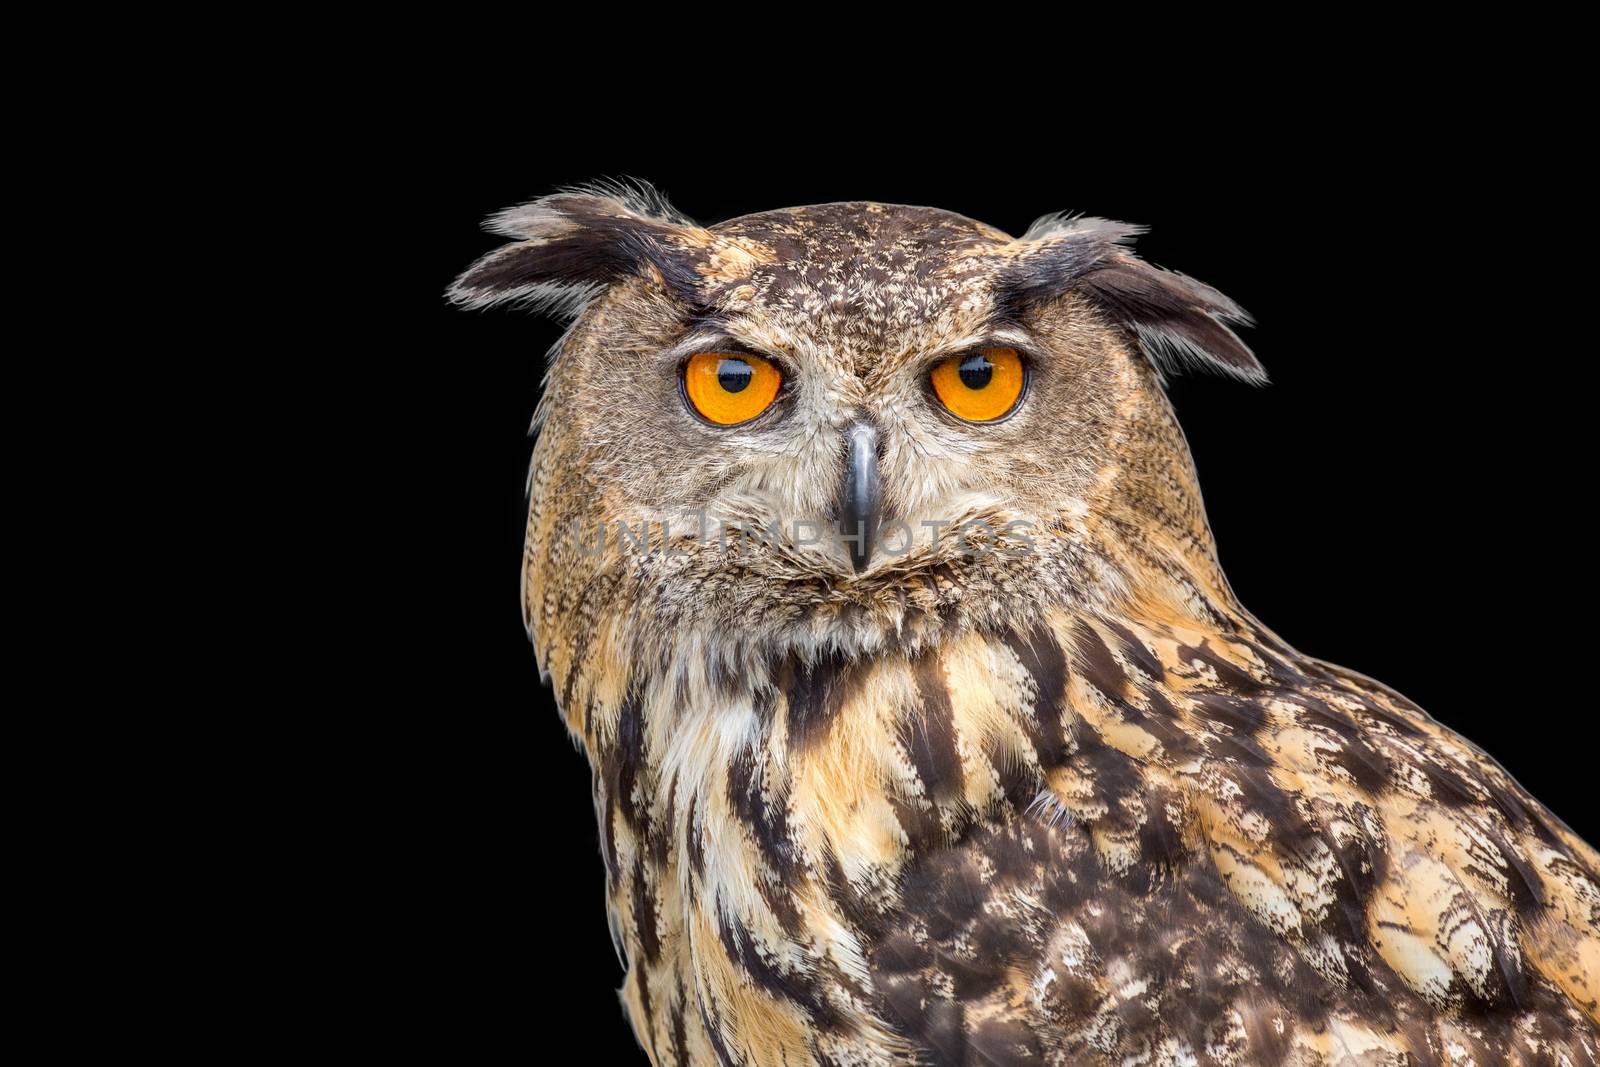 Portrait of eagle owl on black background by BenSchonewille